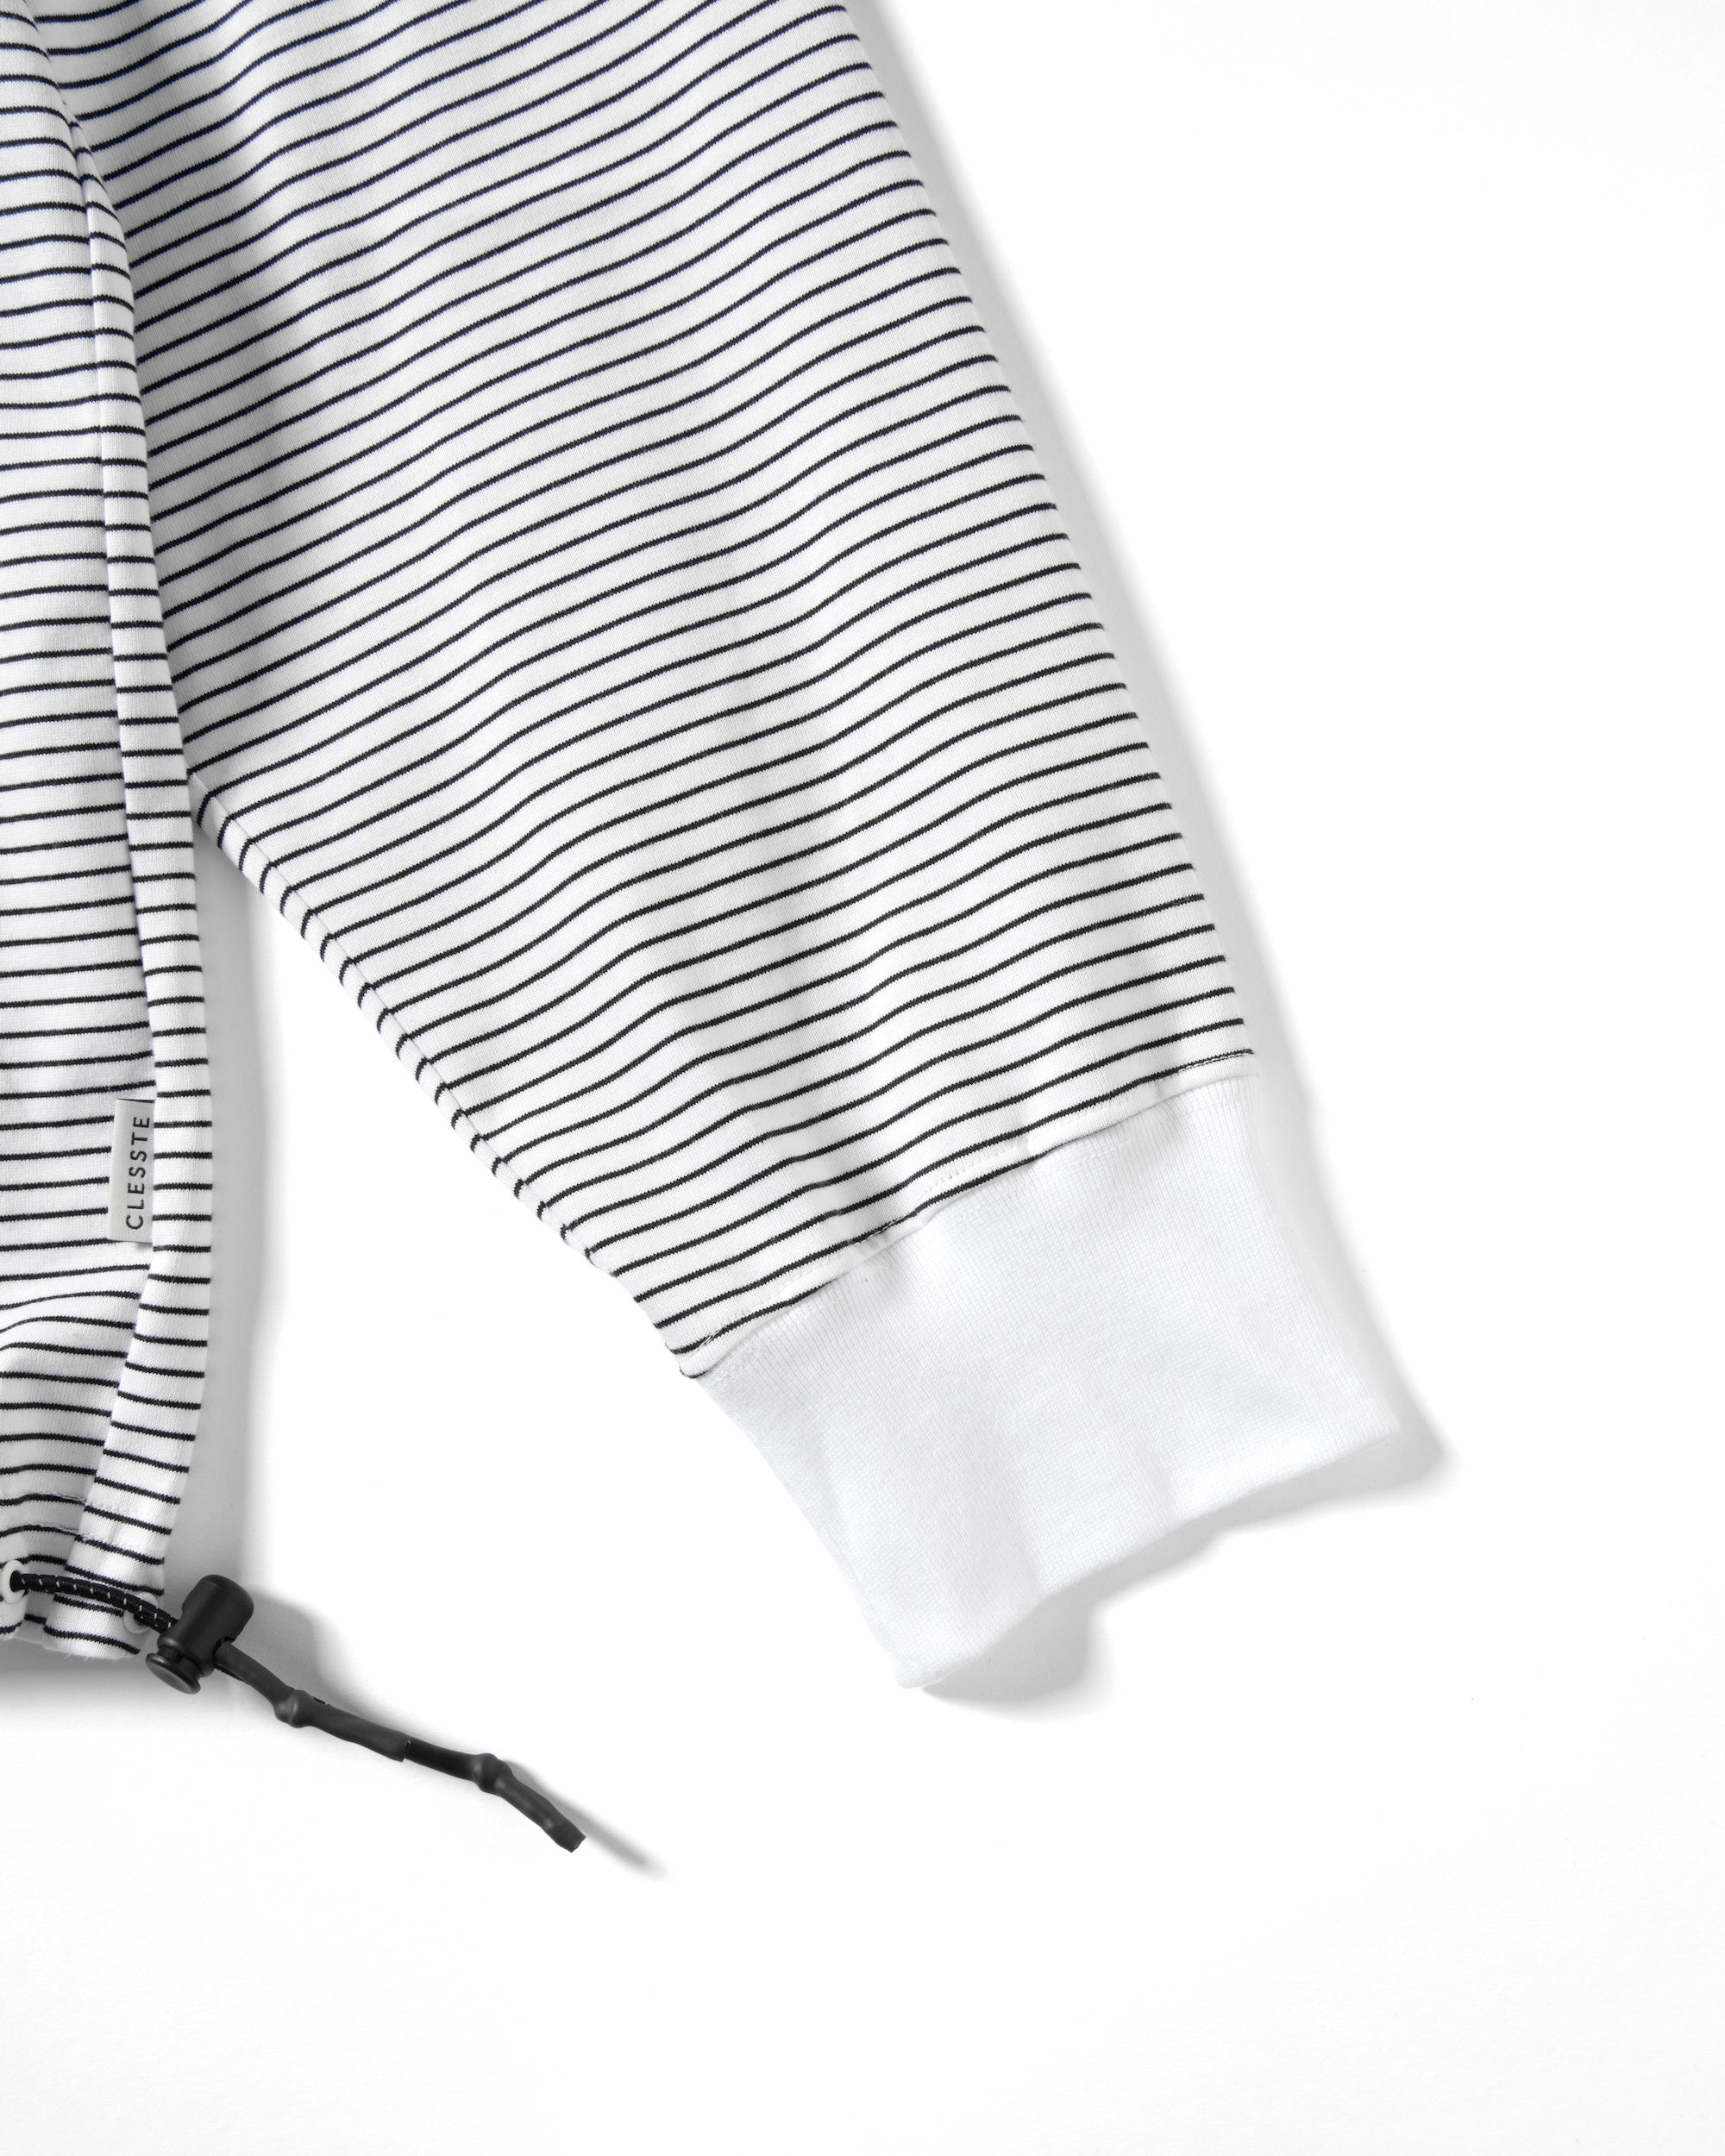 STRIPED MASSIVE L/S T-SHIRT WITH DRAWSTRINGS